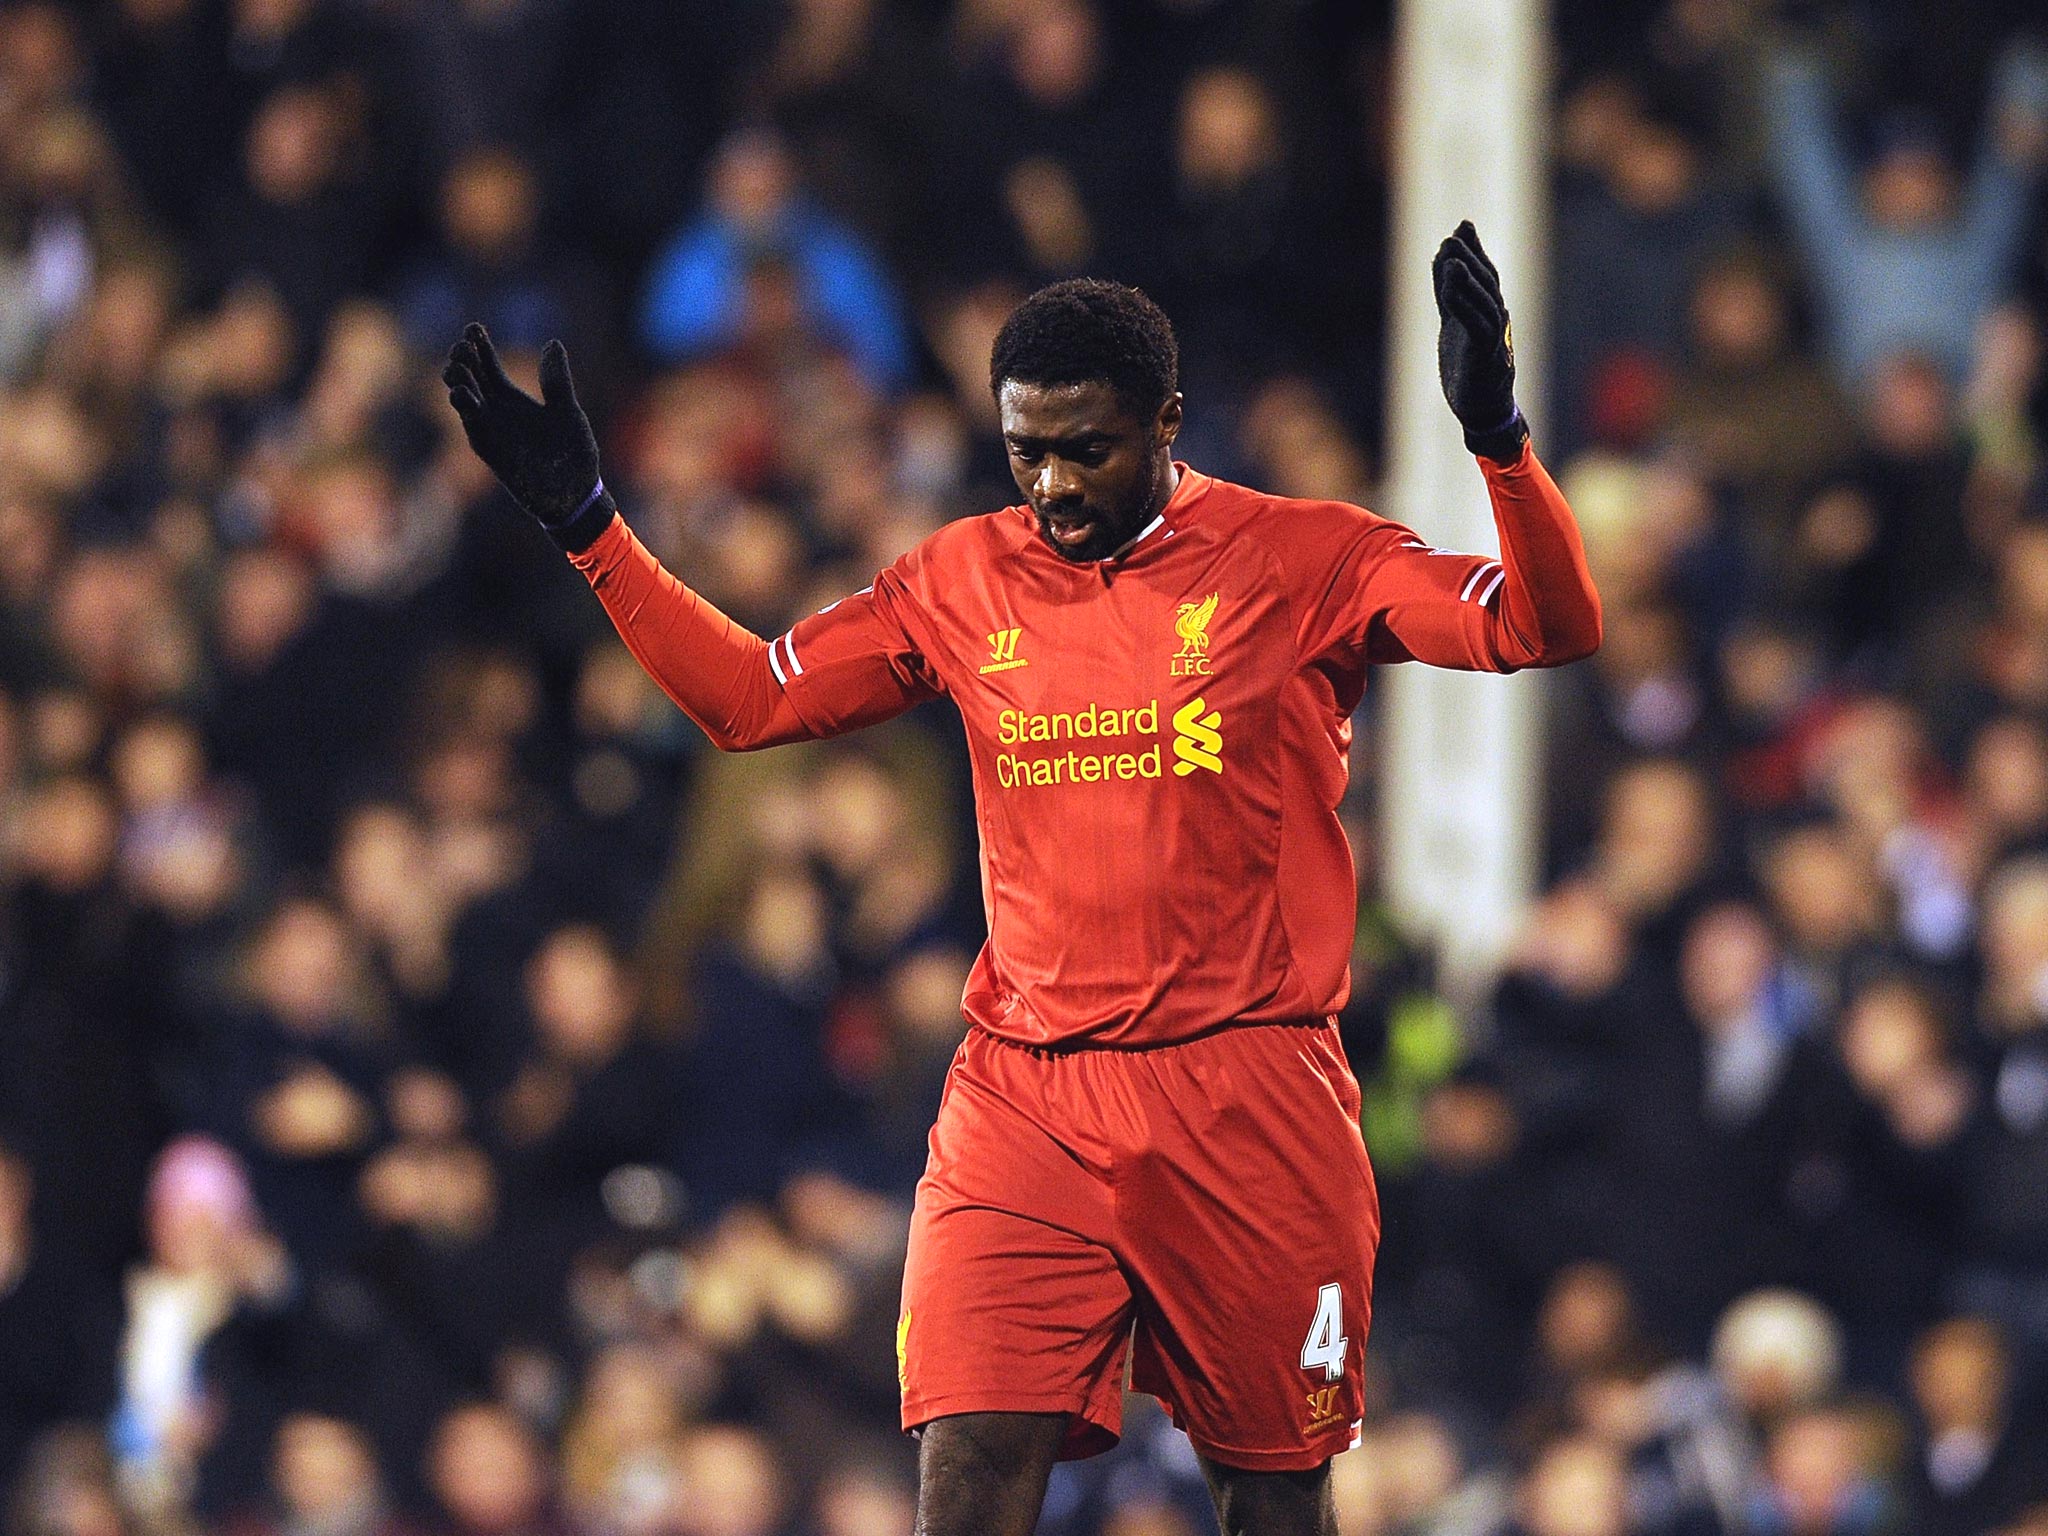 Kolo Toure could soon be his on way to Trabzonspor